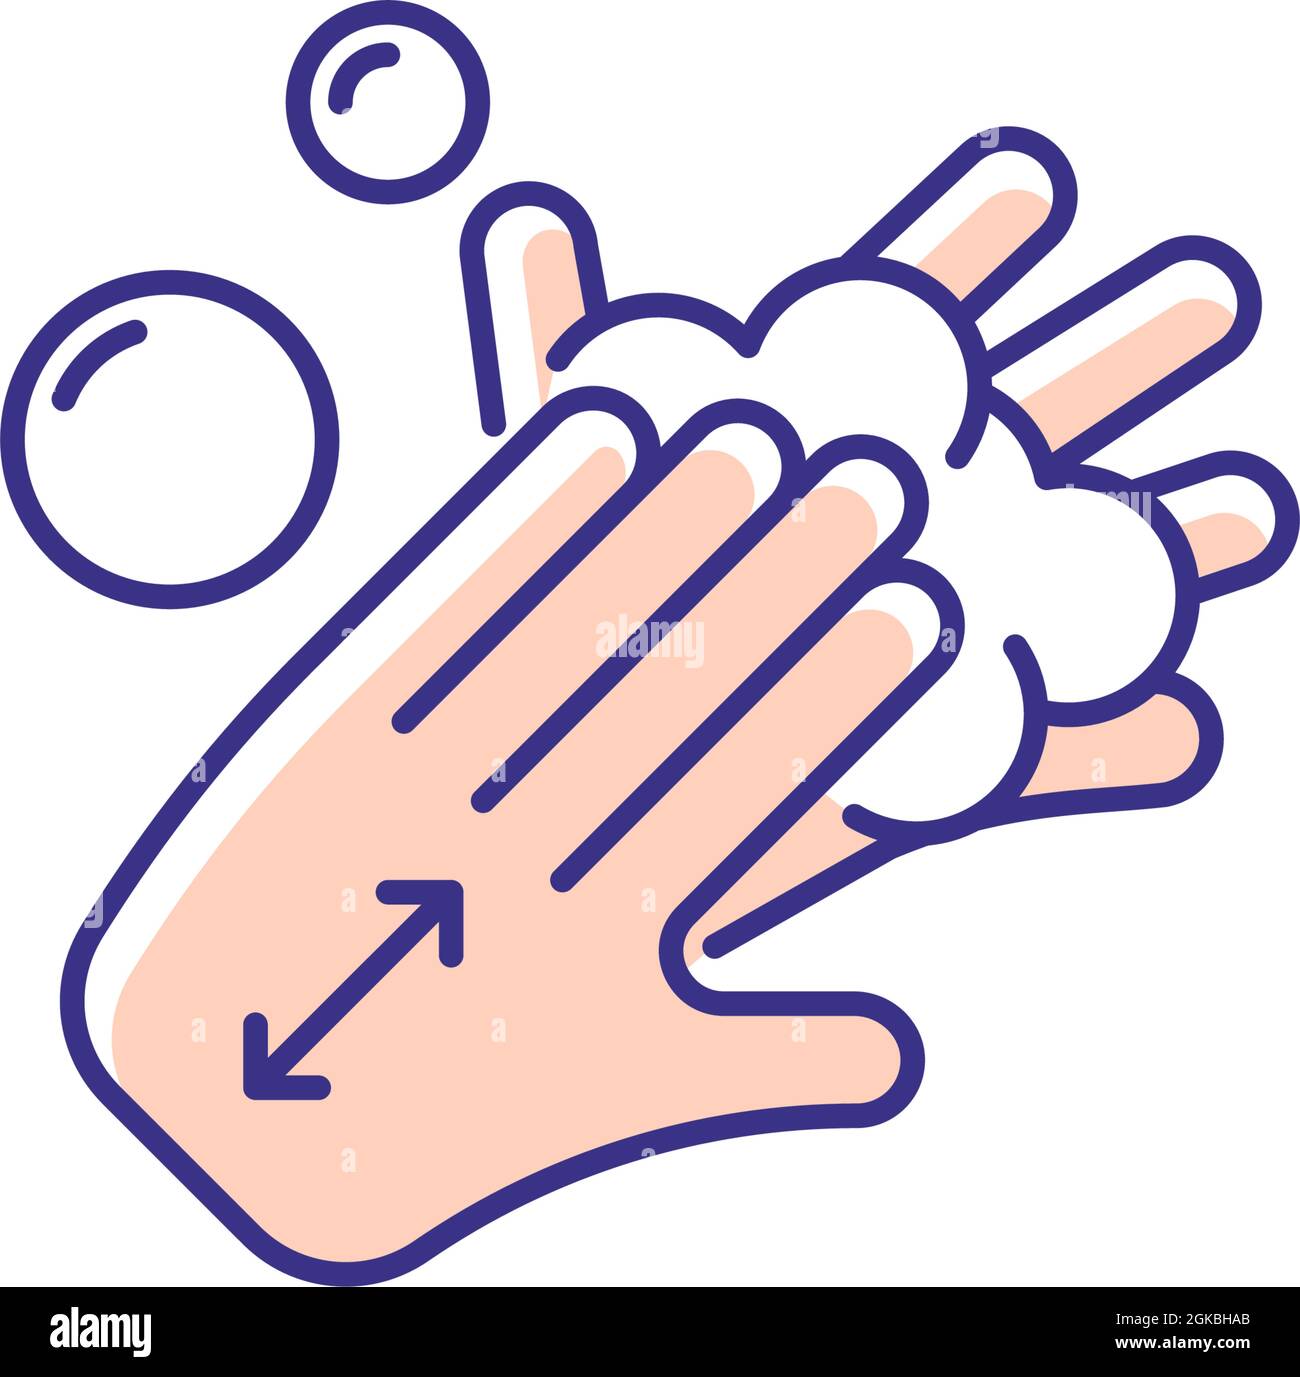 Lathering back of hands RGB color icon Stock Vector